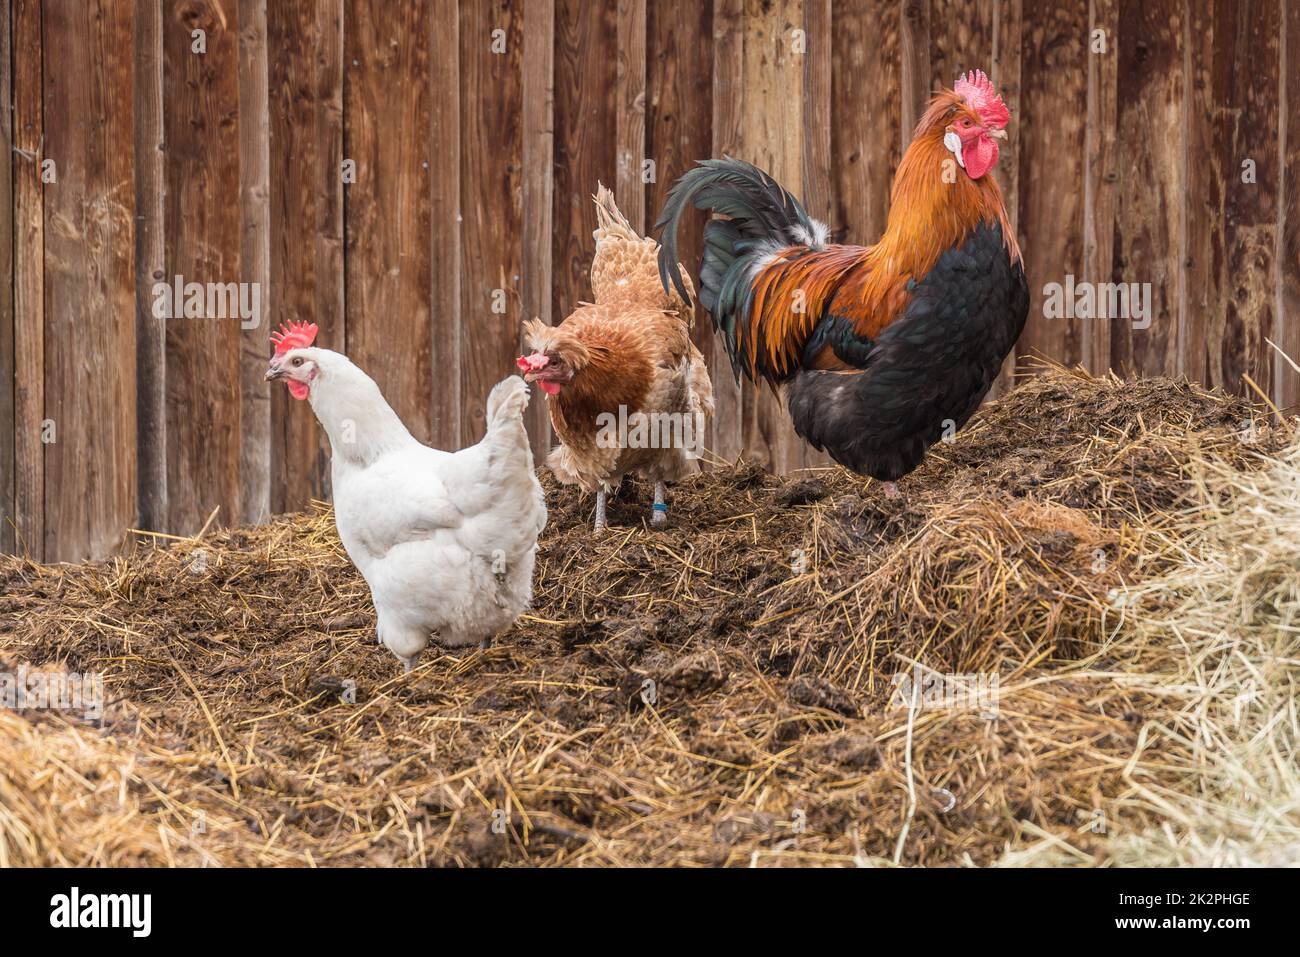 proud rooster stands with happy chickens on dung heaps - species-appropriate animal husbandry Stock Photo